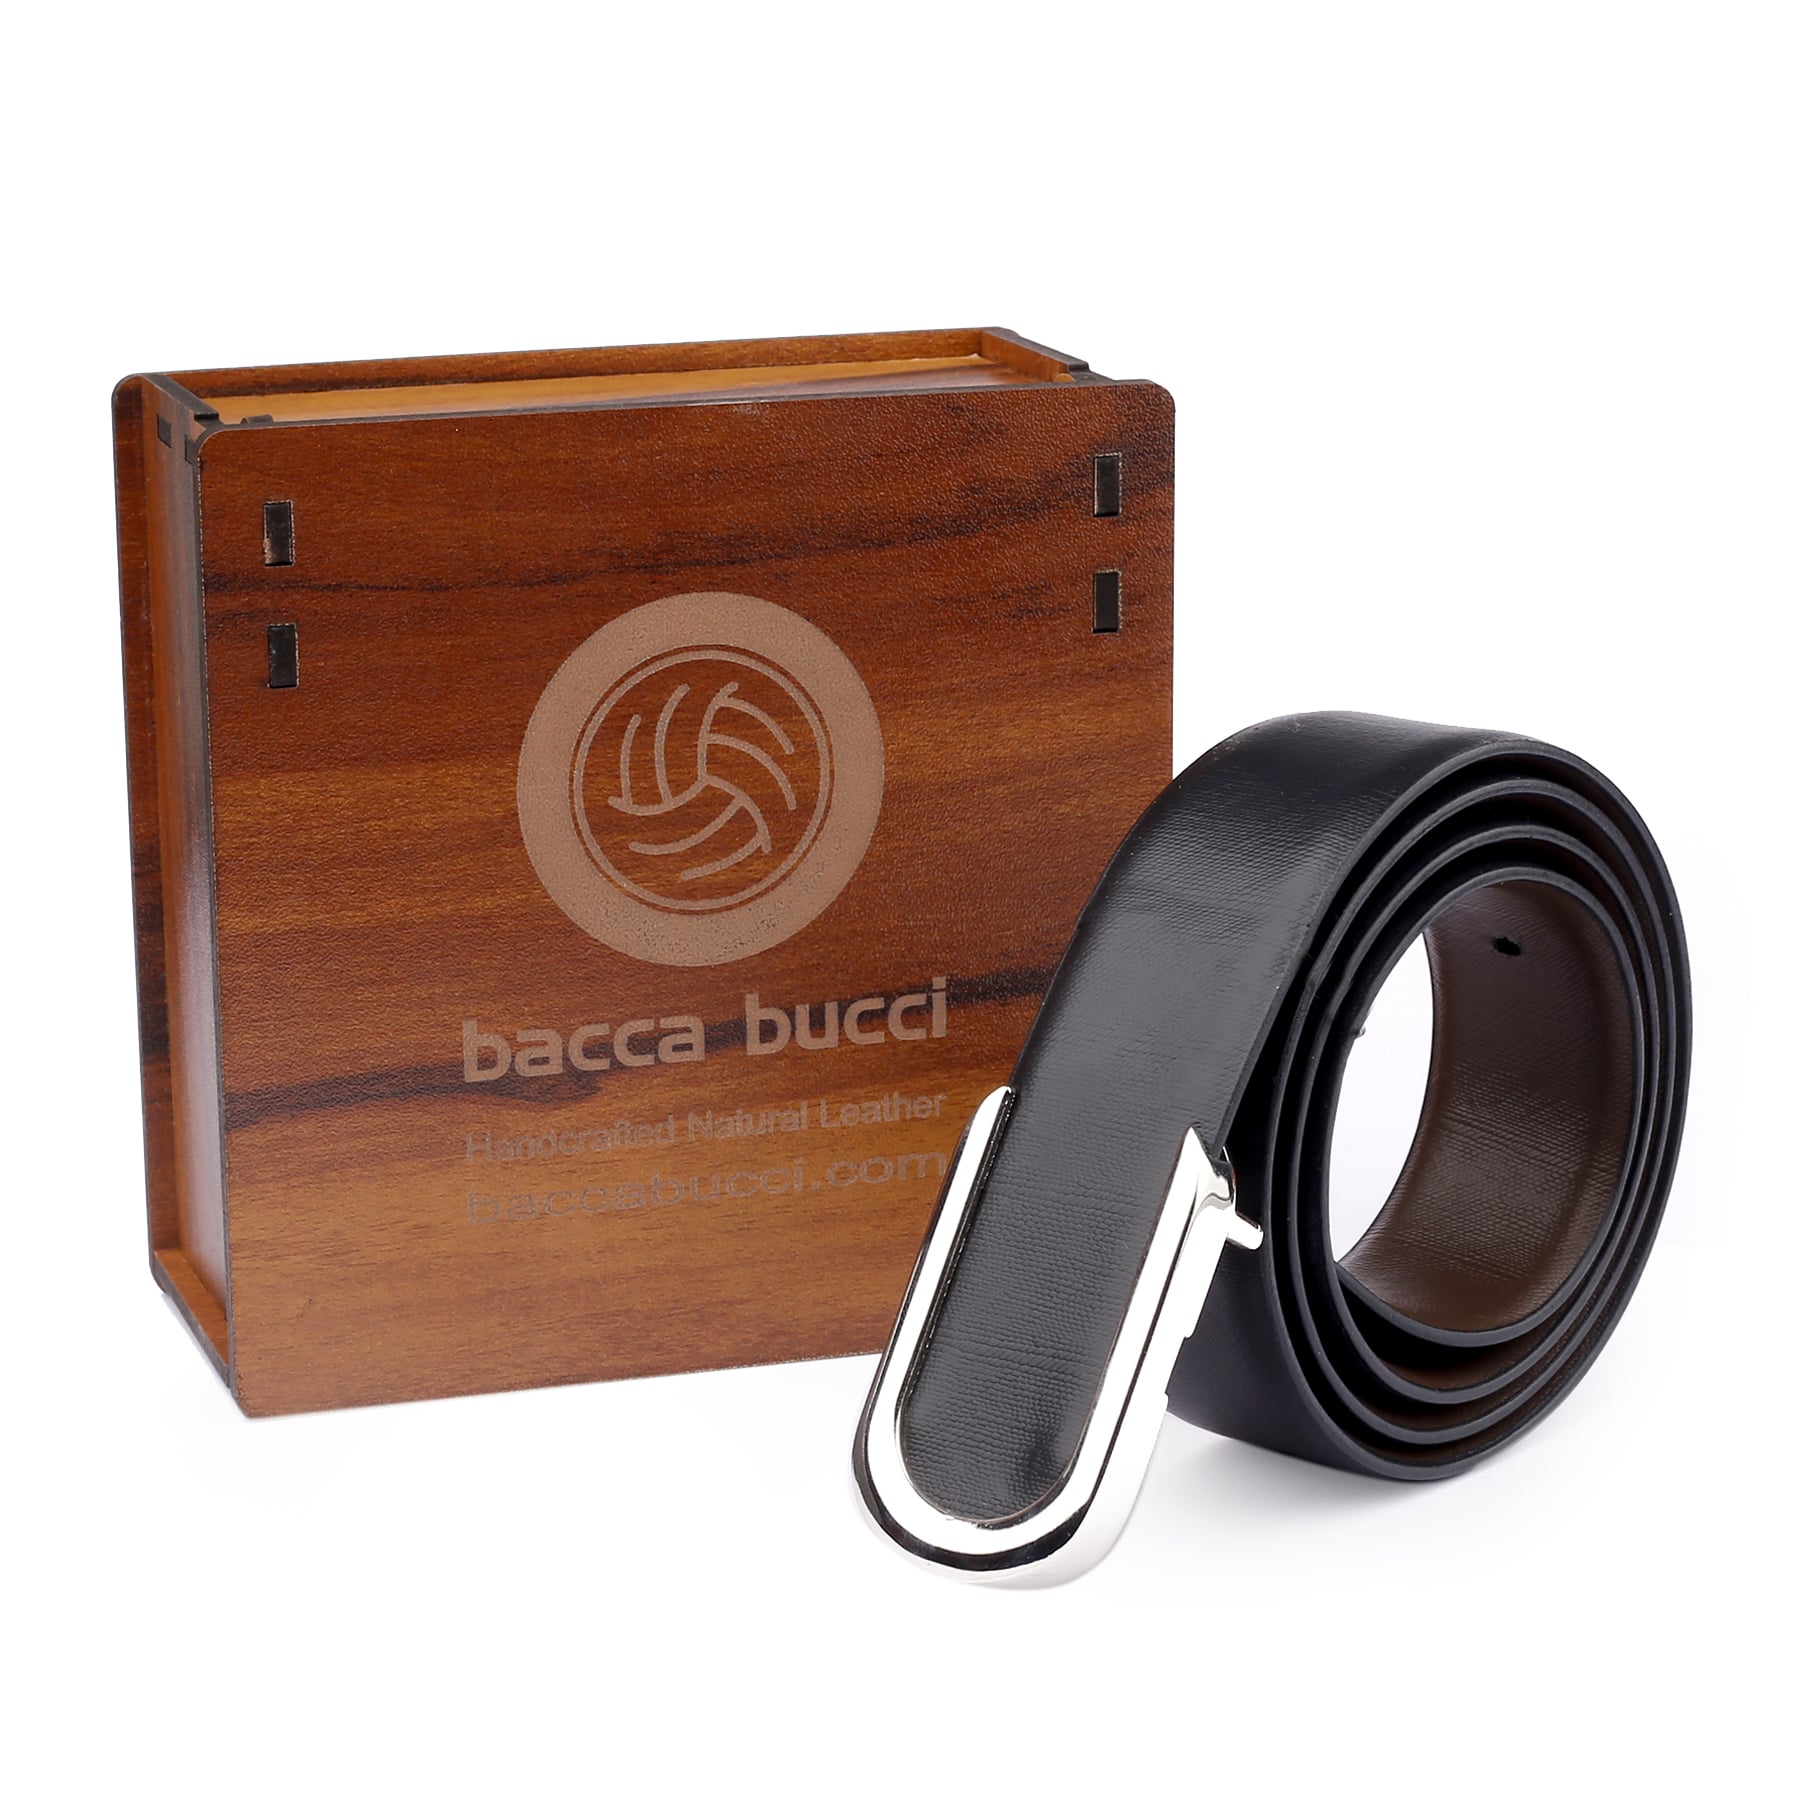 Bacca Bucci Men Genuine Leather Dress and Formal Belts | Premium Quality | Classic & Fashion Design for Work Business & Casual